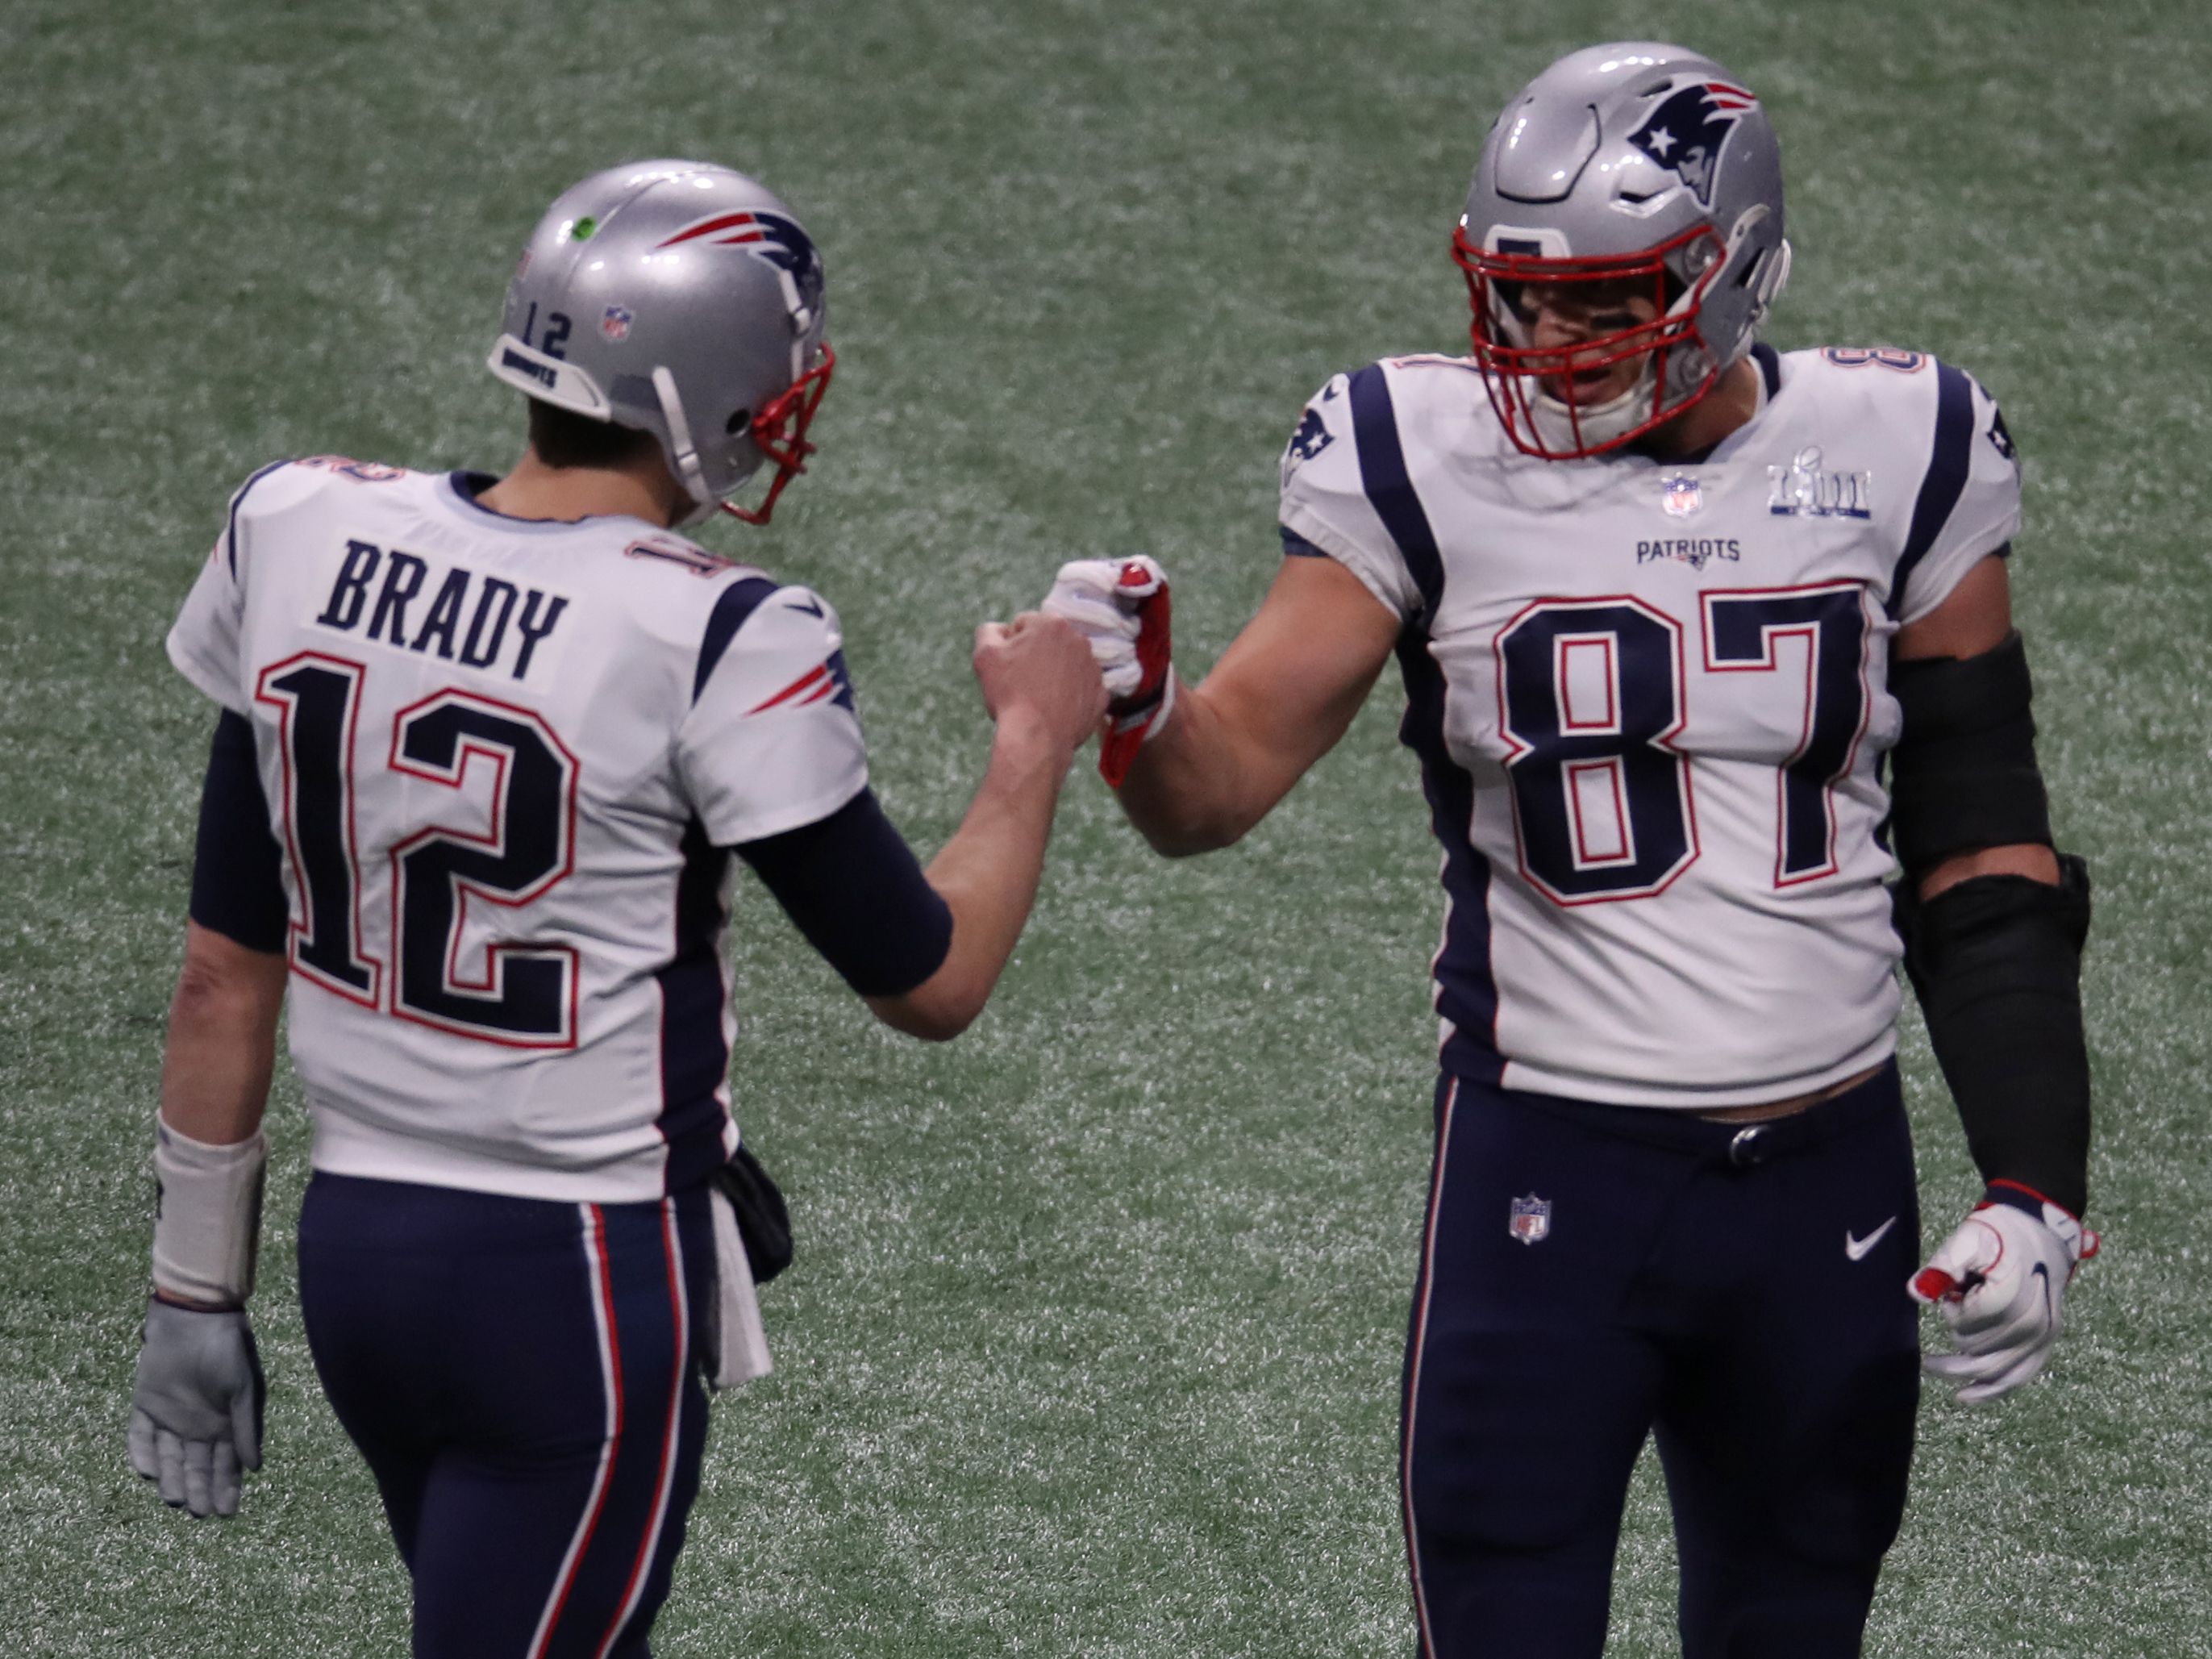 Tom Brady, Patriots show their support for Bruins - The Boston Globe